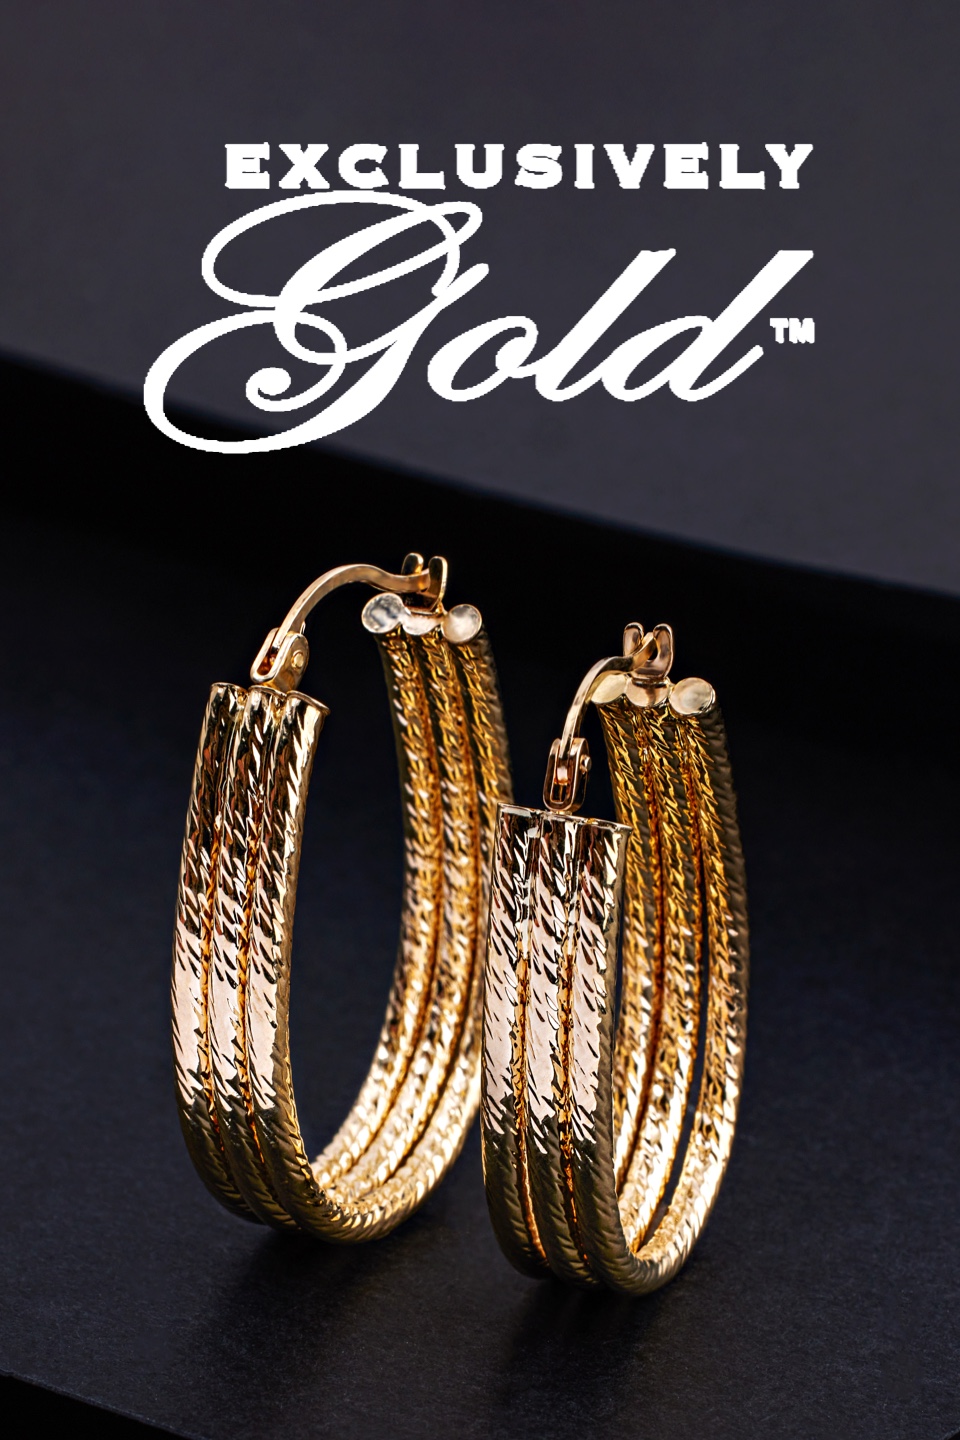 Series Banner for Exclusively Gold Jewelry